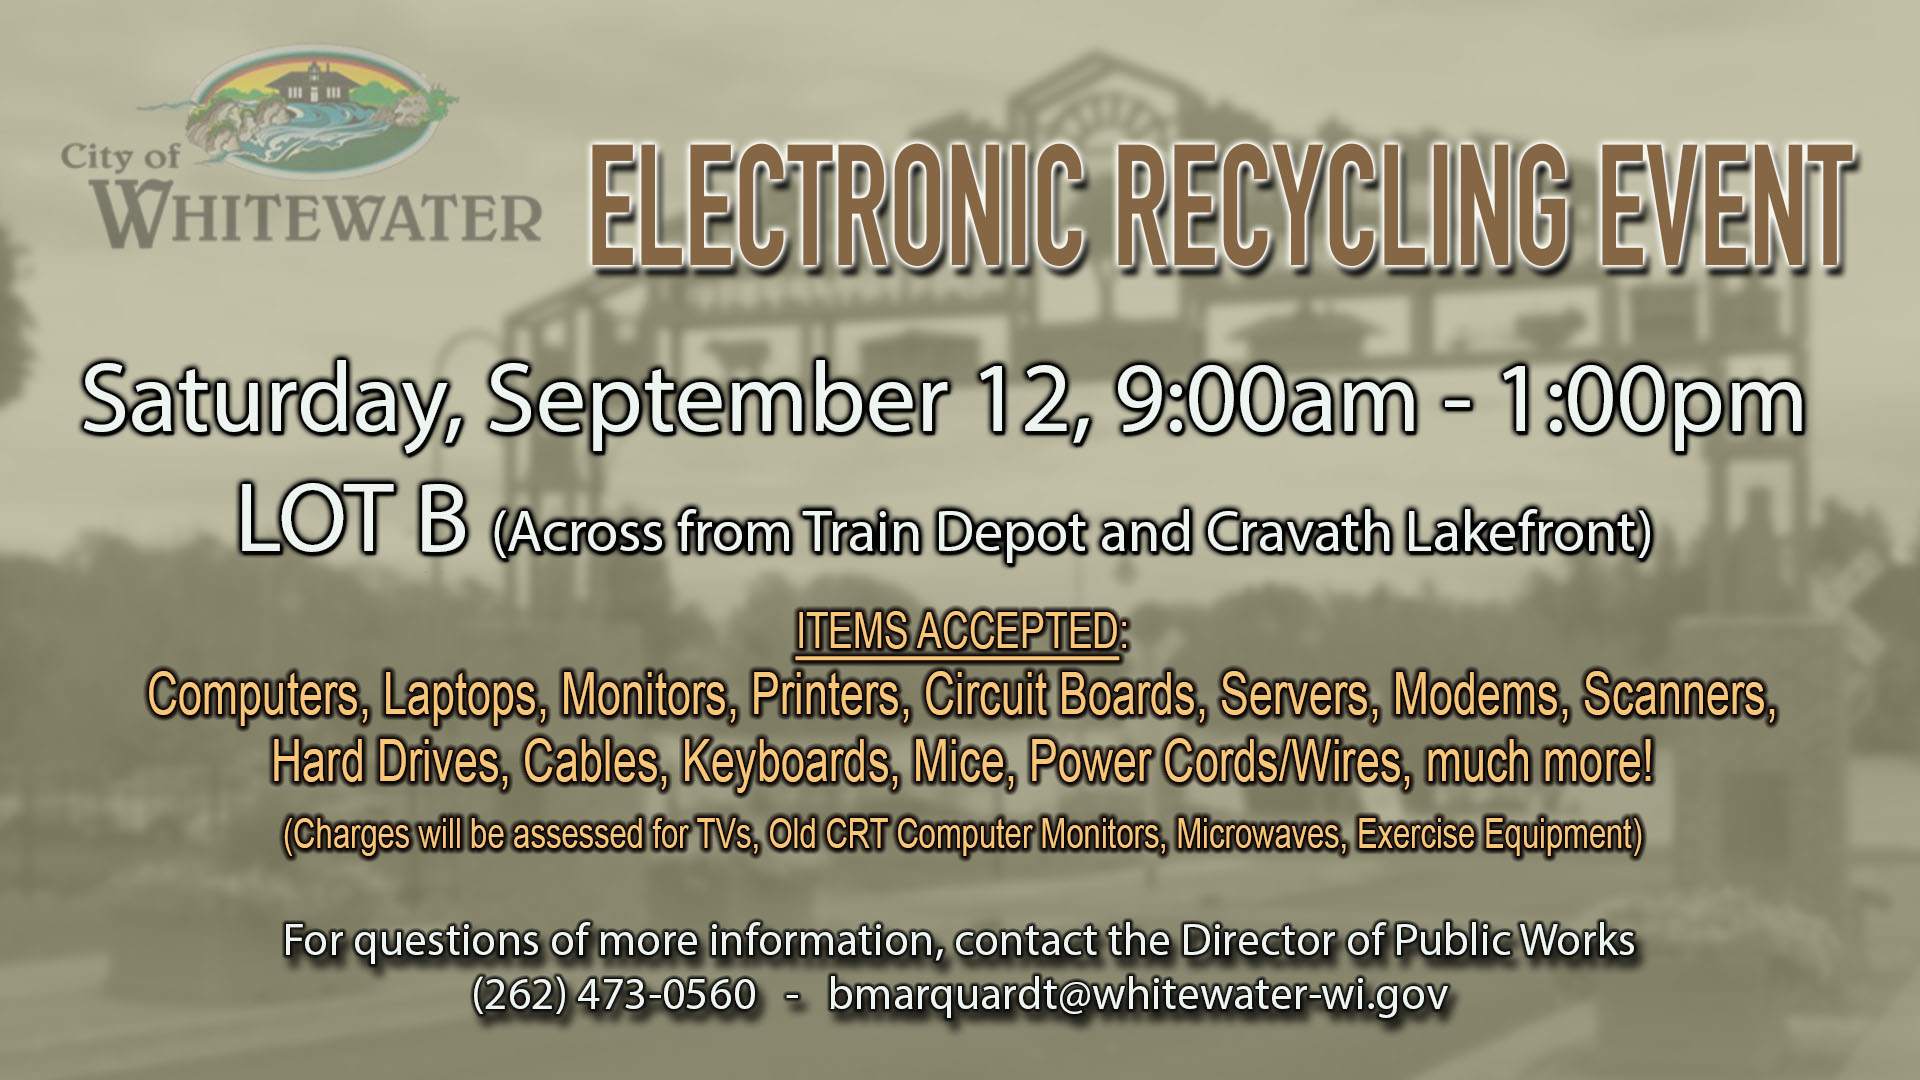 City of Whitewater Electronic Recycling Event Scheduled for September 12